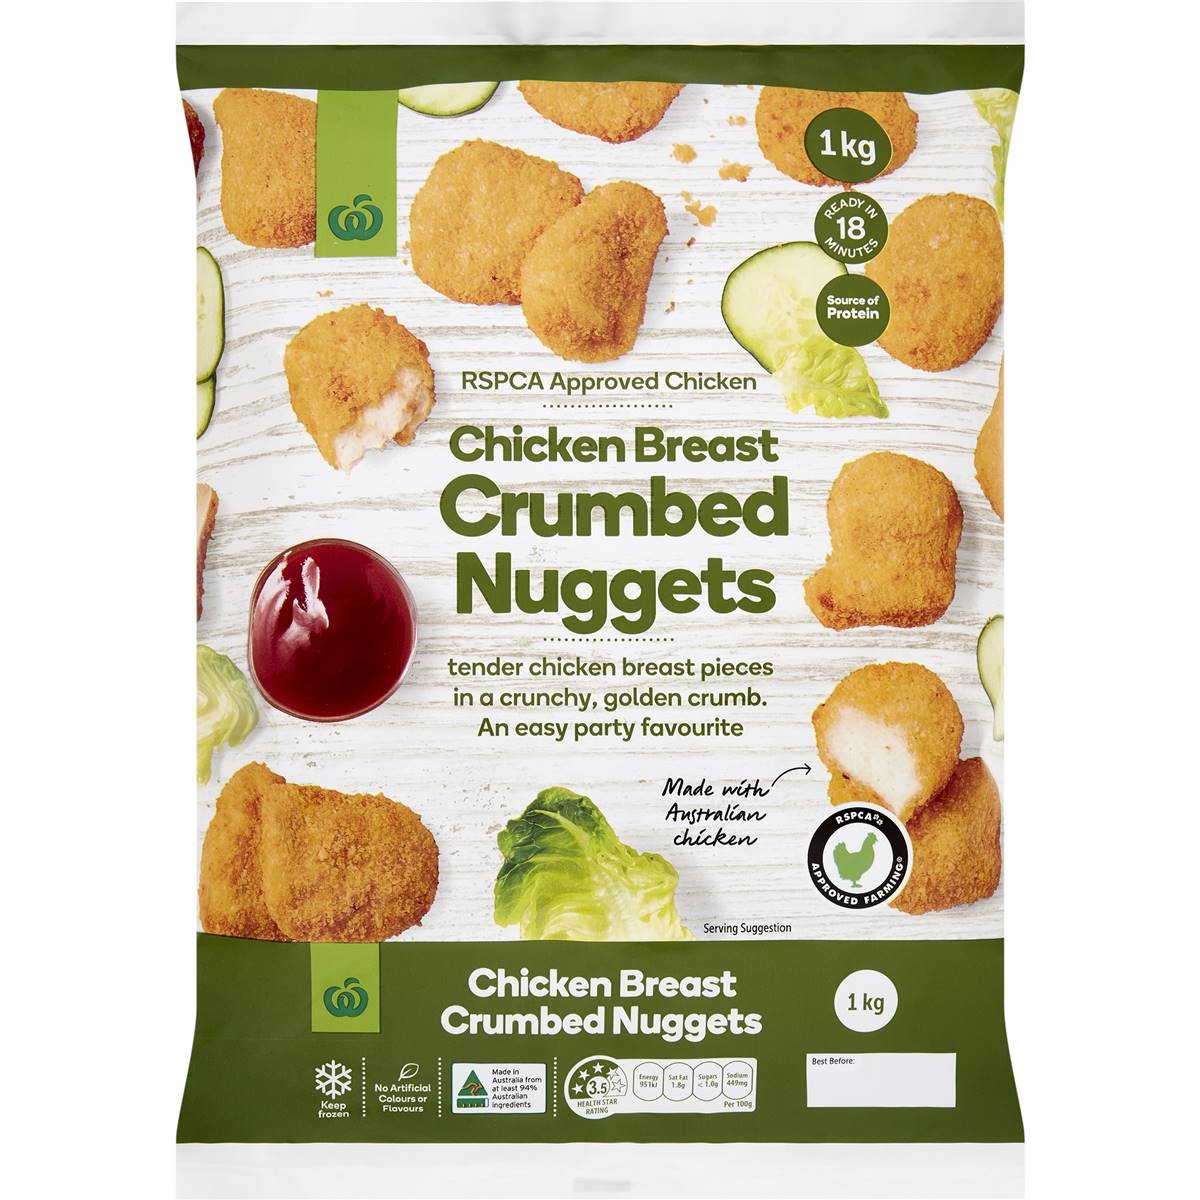 Calories in Woolworths Crumbed Chicken Breast Nuggets